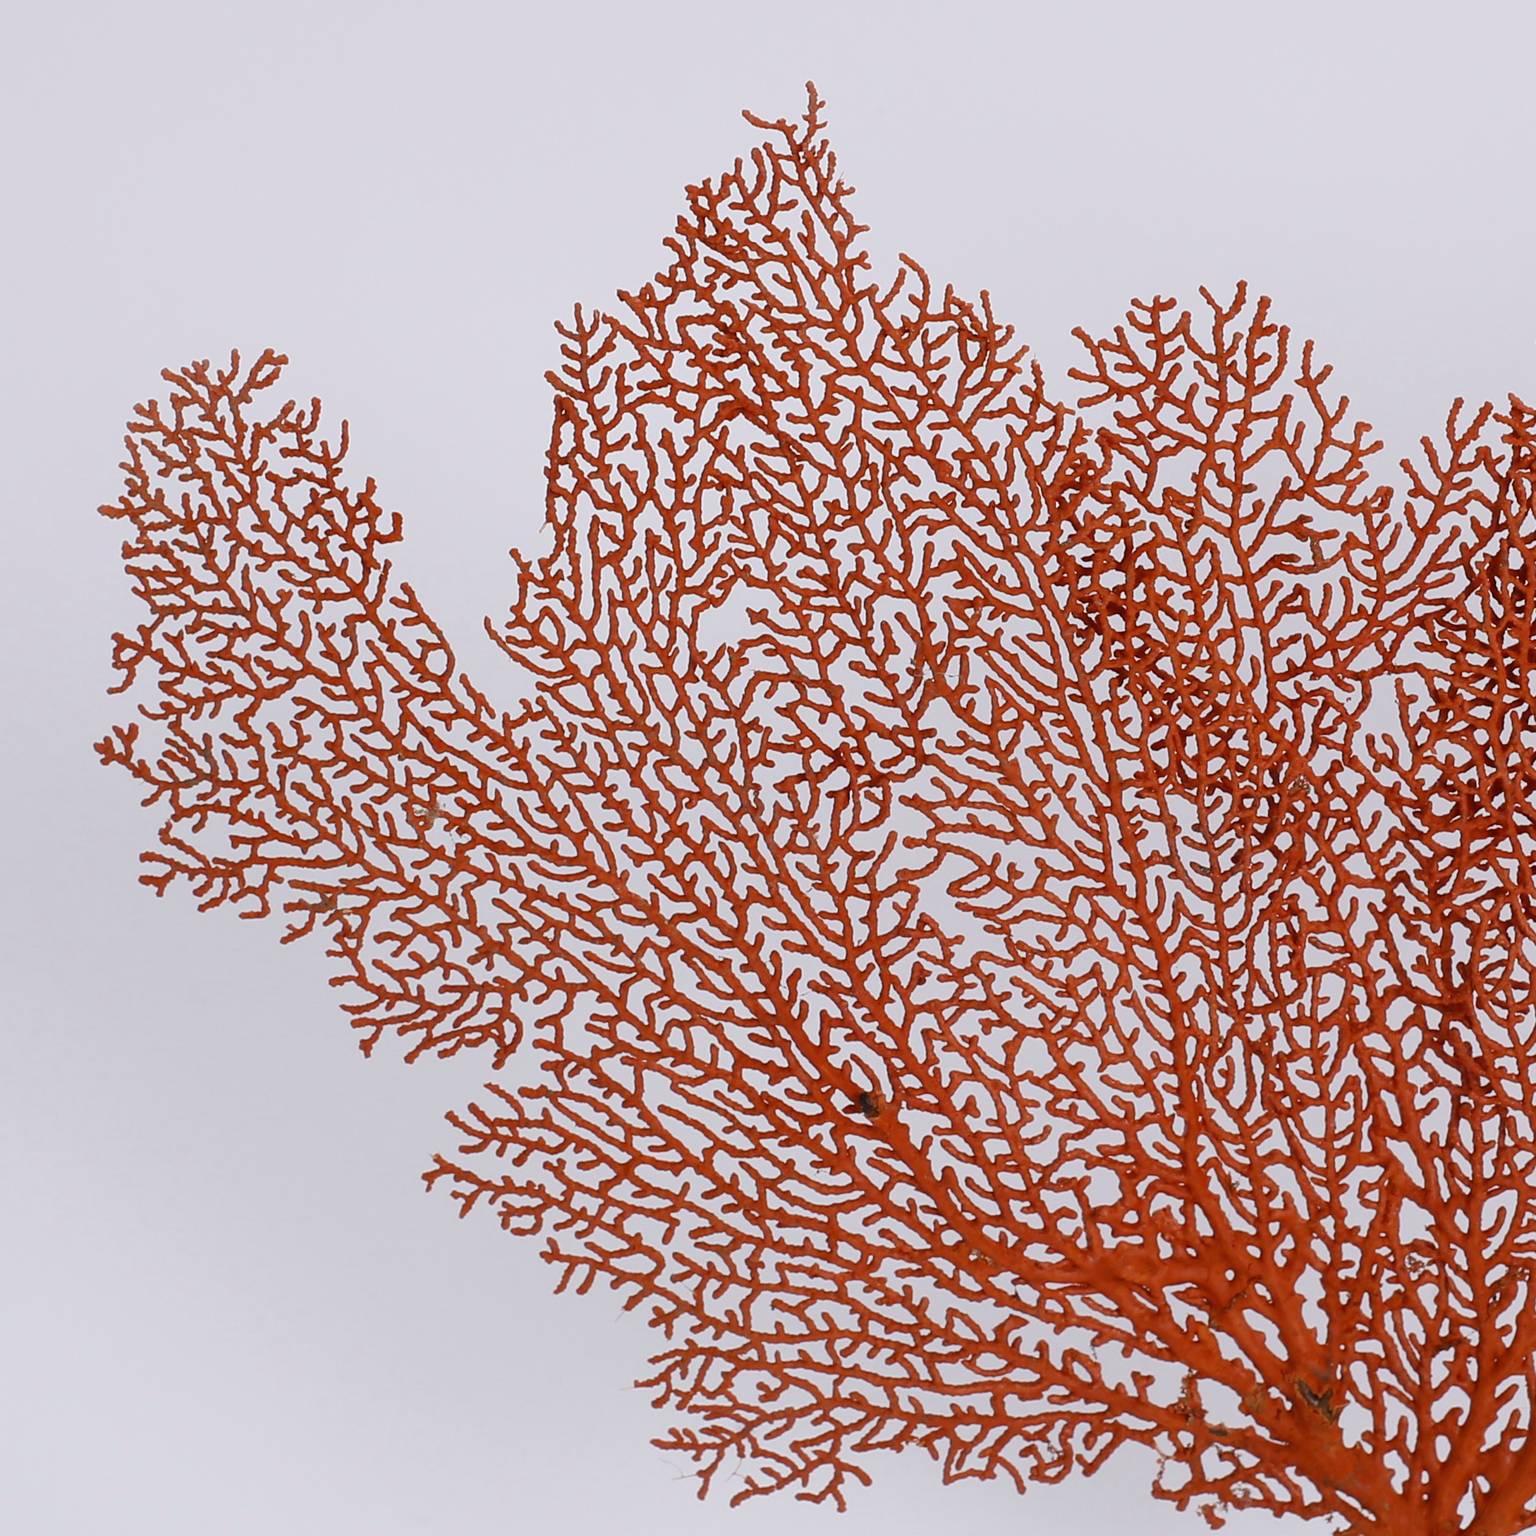 Authentic red sea fan with its glorious form and vibrant tropical color. Presented on a custom Lucite base.